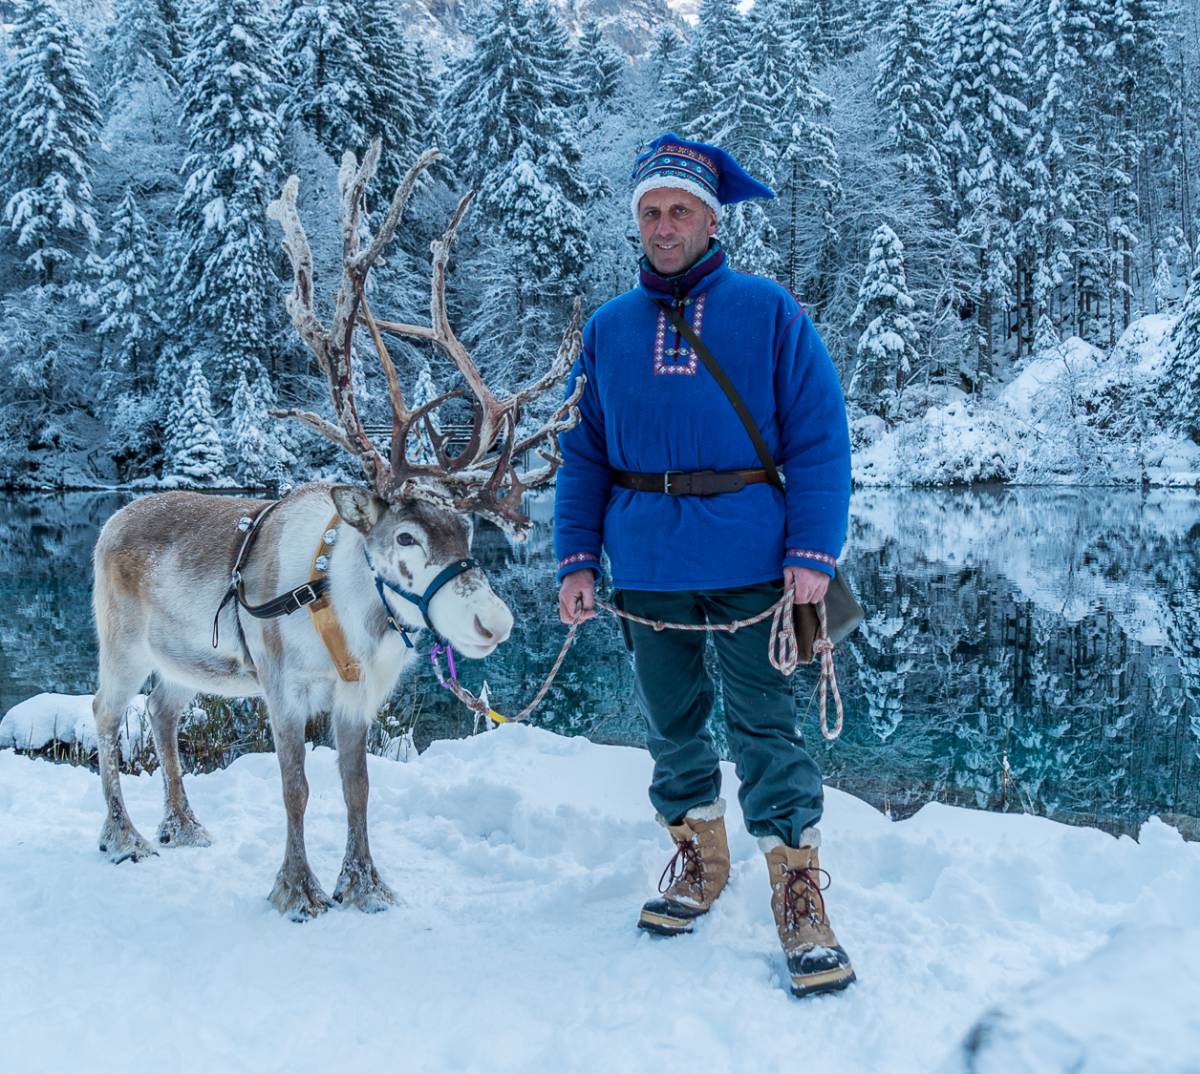  Winter magic with reindeer at the Blausee Christmas market